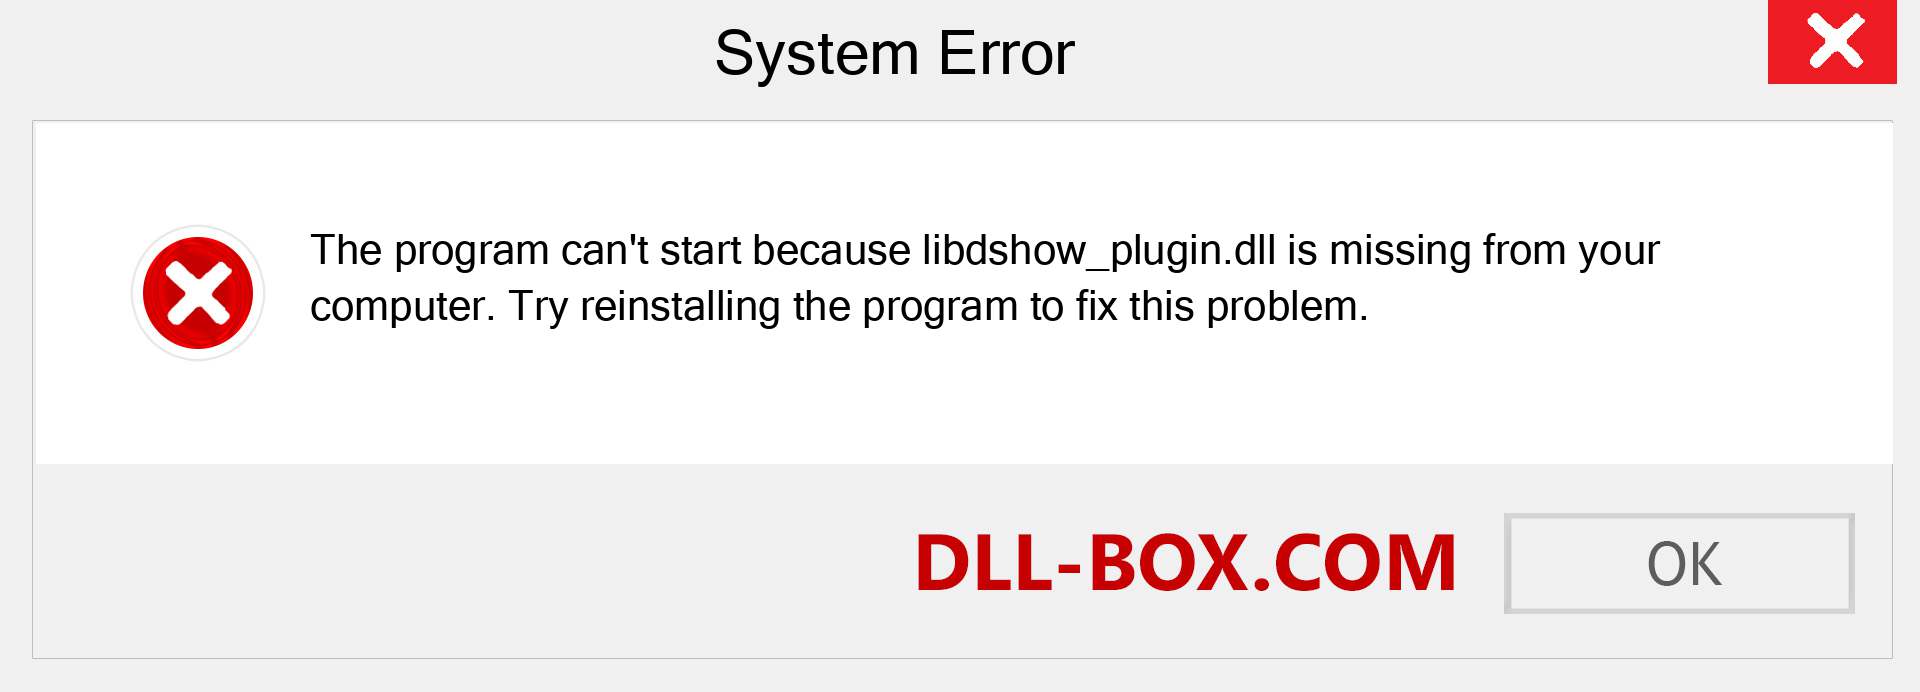  libdshow_plugin.dll file is missing?. Download for Windows 7, 8, 10 - Fix  libdshow_plugin dll Missing Error on Windows, photos, images